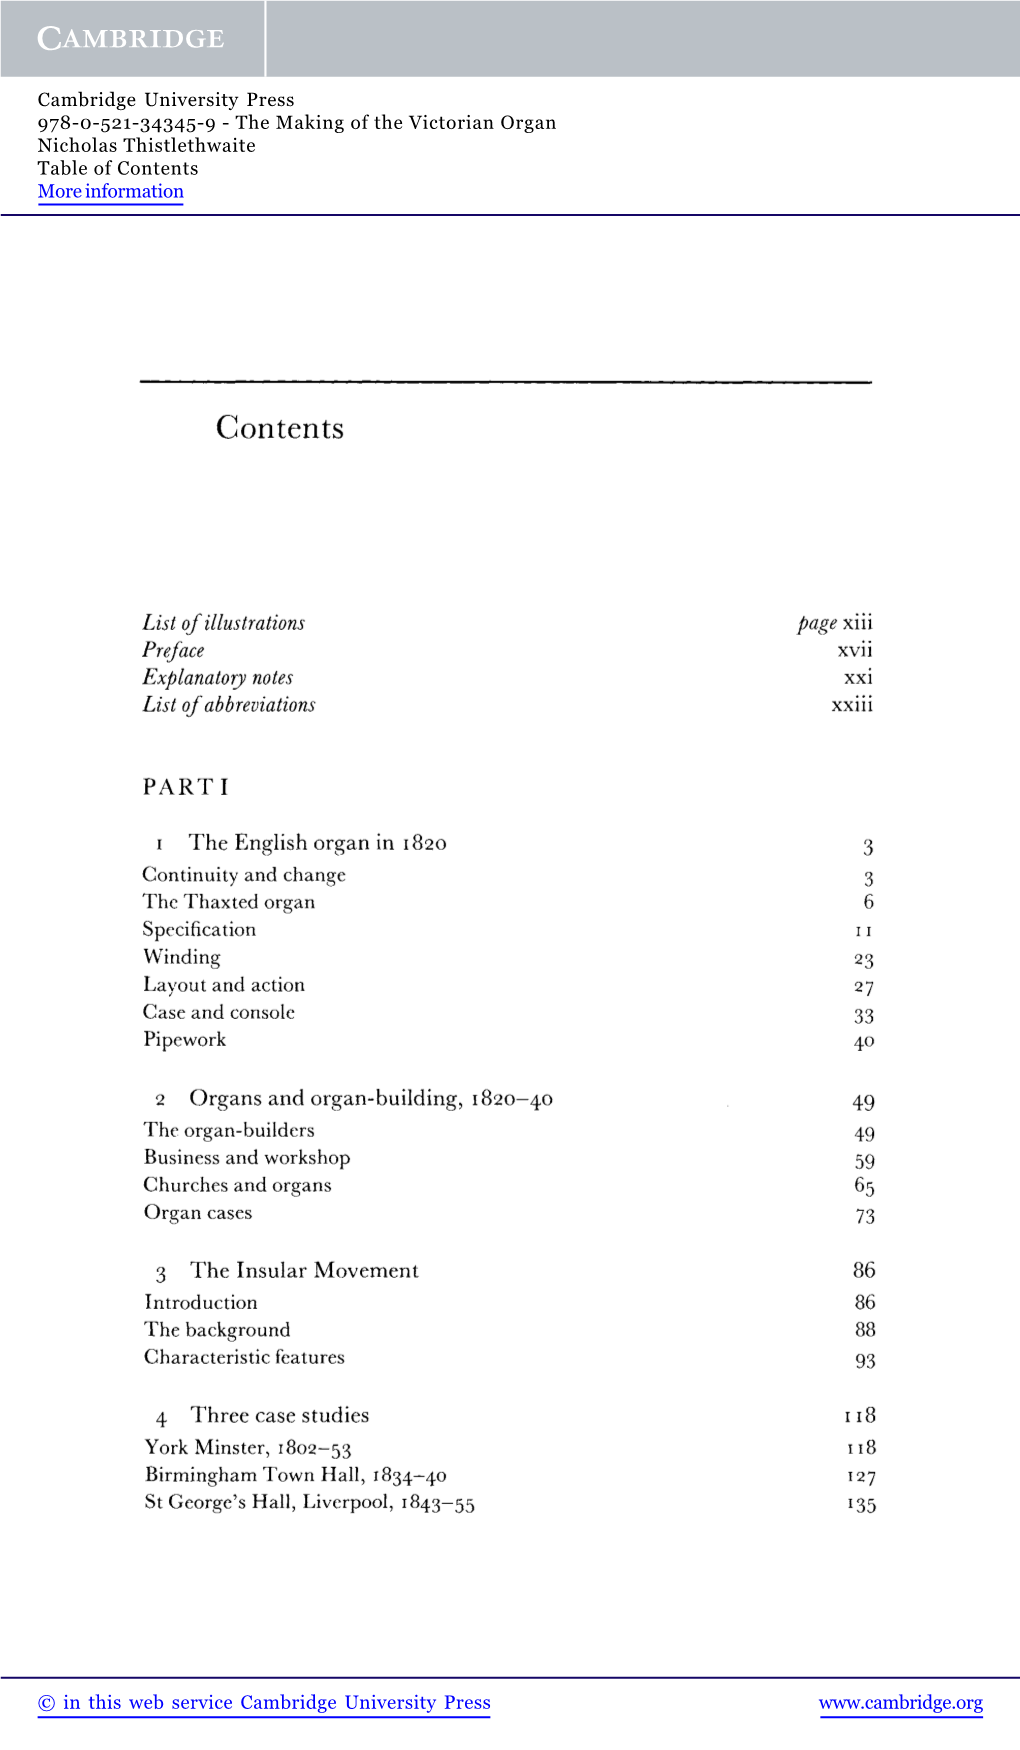 The Making of the Victorian Organ Nicholas Thistlethwaite Table of Contents More Information